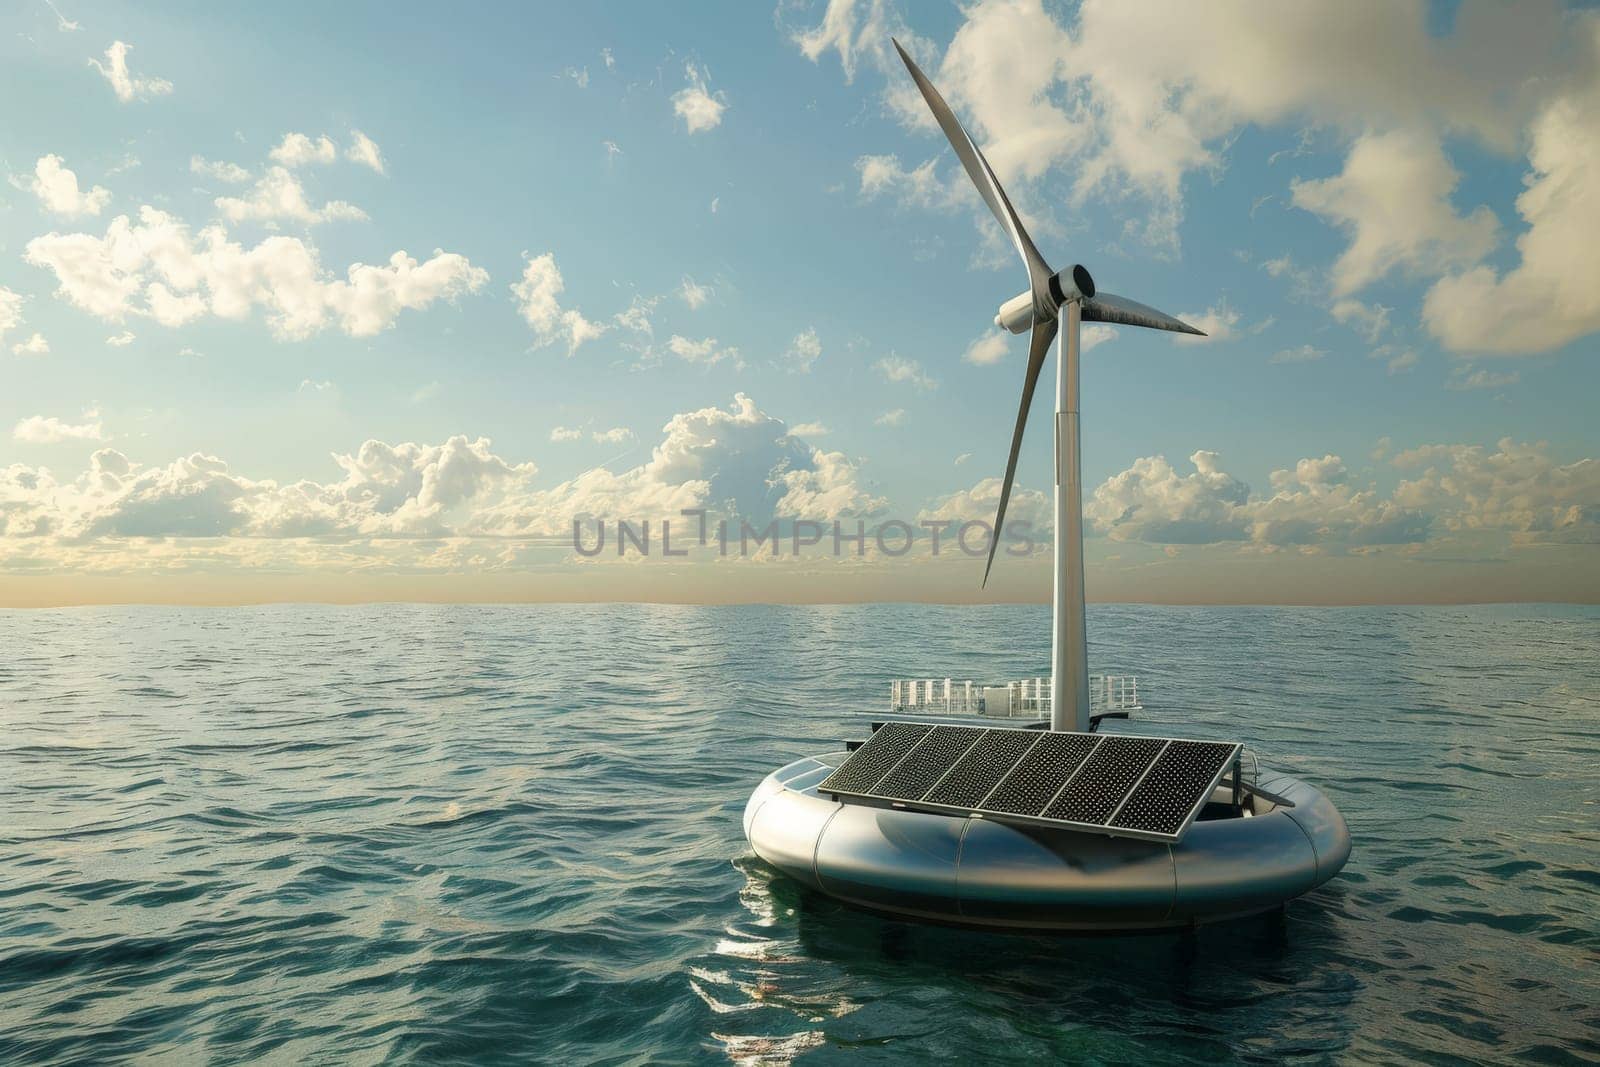 A wind turbine is floating on the ocean. The turbine is surrounded by water and is in the middle of the ocean